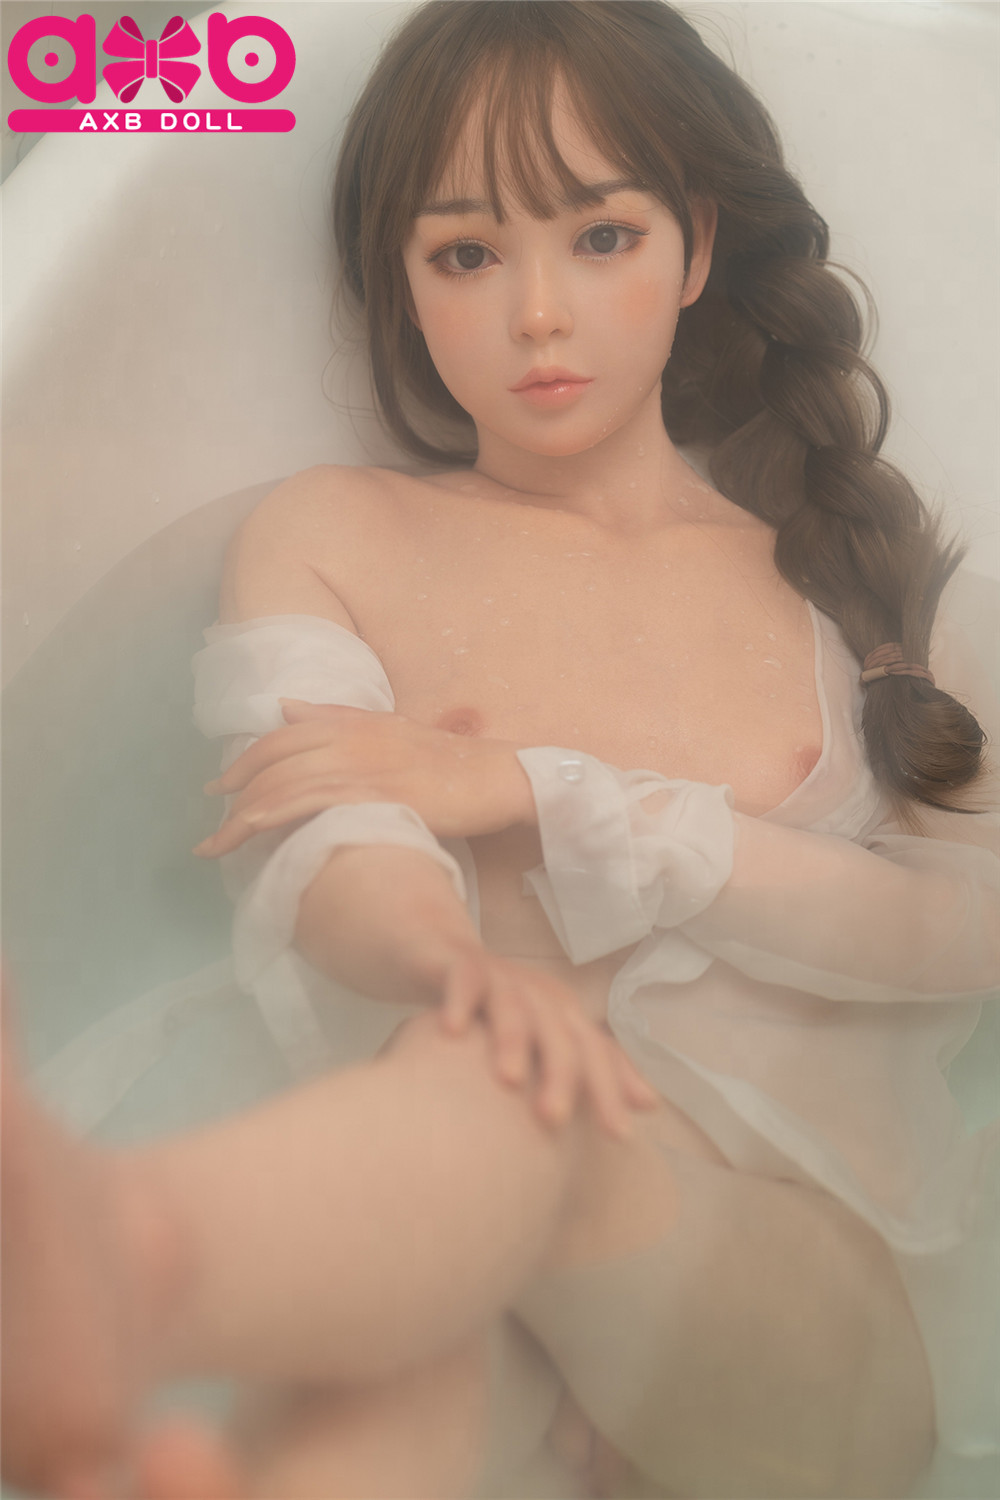 AXBDOLL 148cm G06# Silicone Anime Love Doll Life Size Sex Doll - 画像をクリックして閉じます